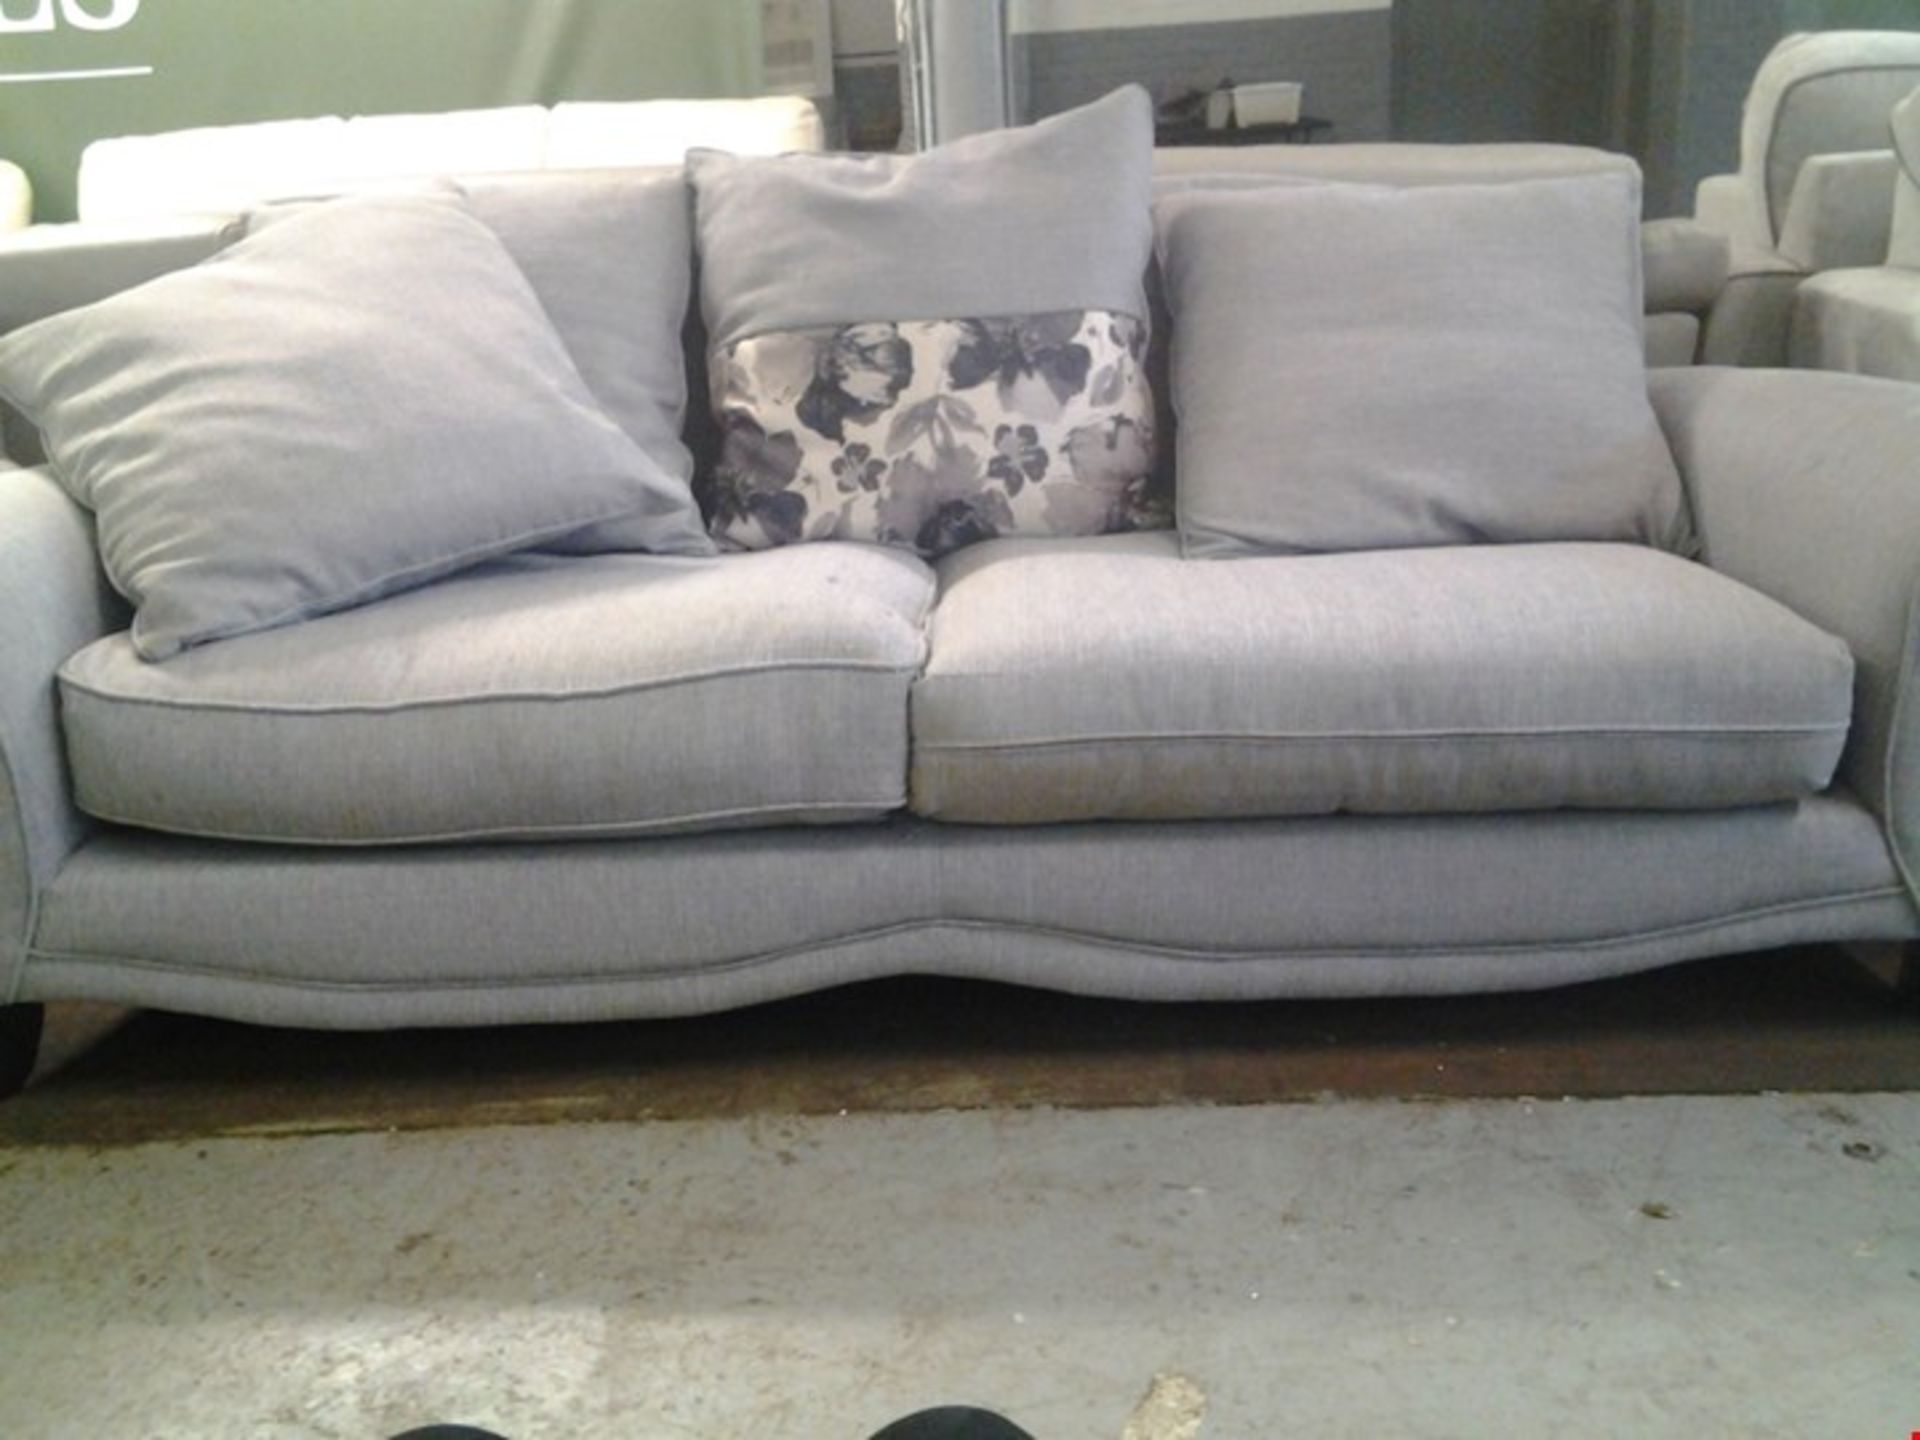 DESIGNER GREY FABRIC 2 SEATER SOFA AND 3 SEATER SOFA WITH GREY AND FLORAL SCATTERBACK CUSHIONS....